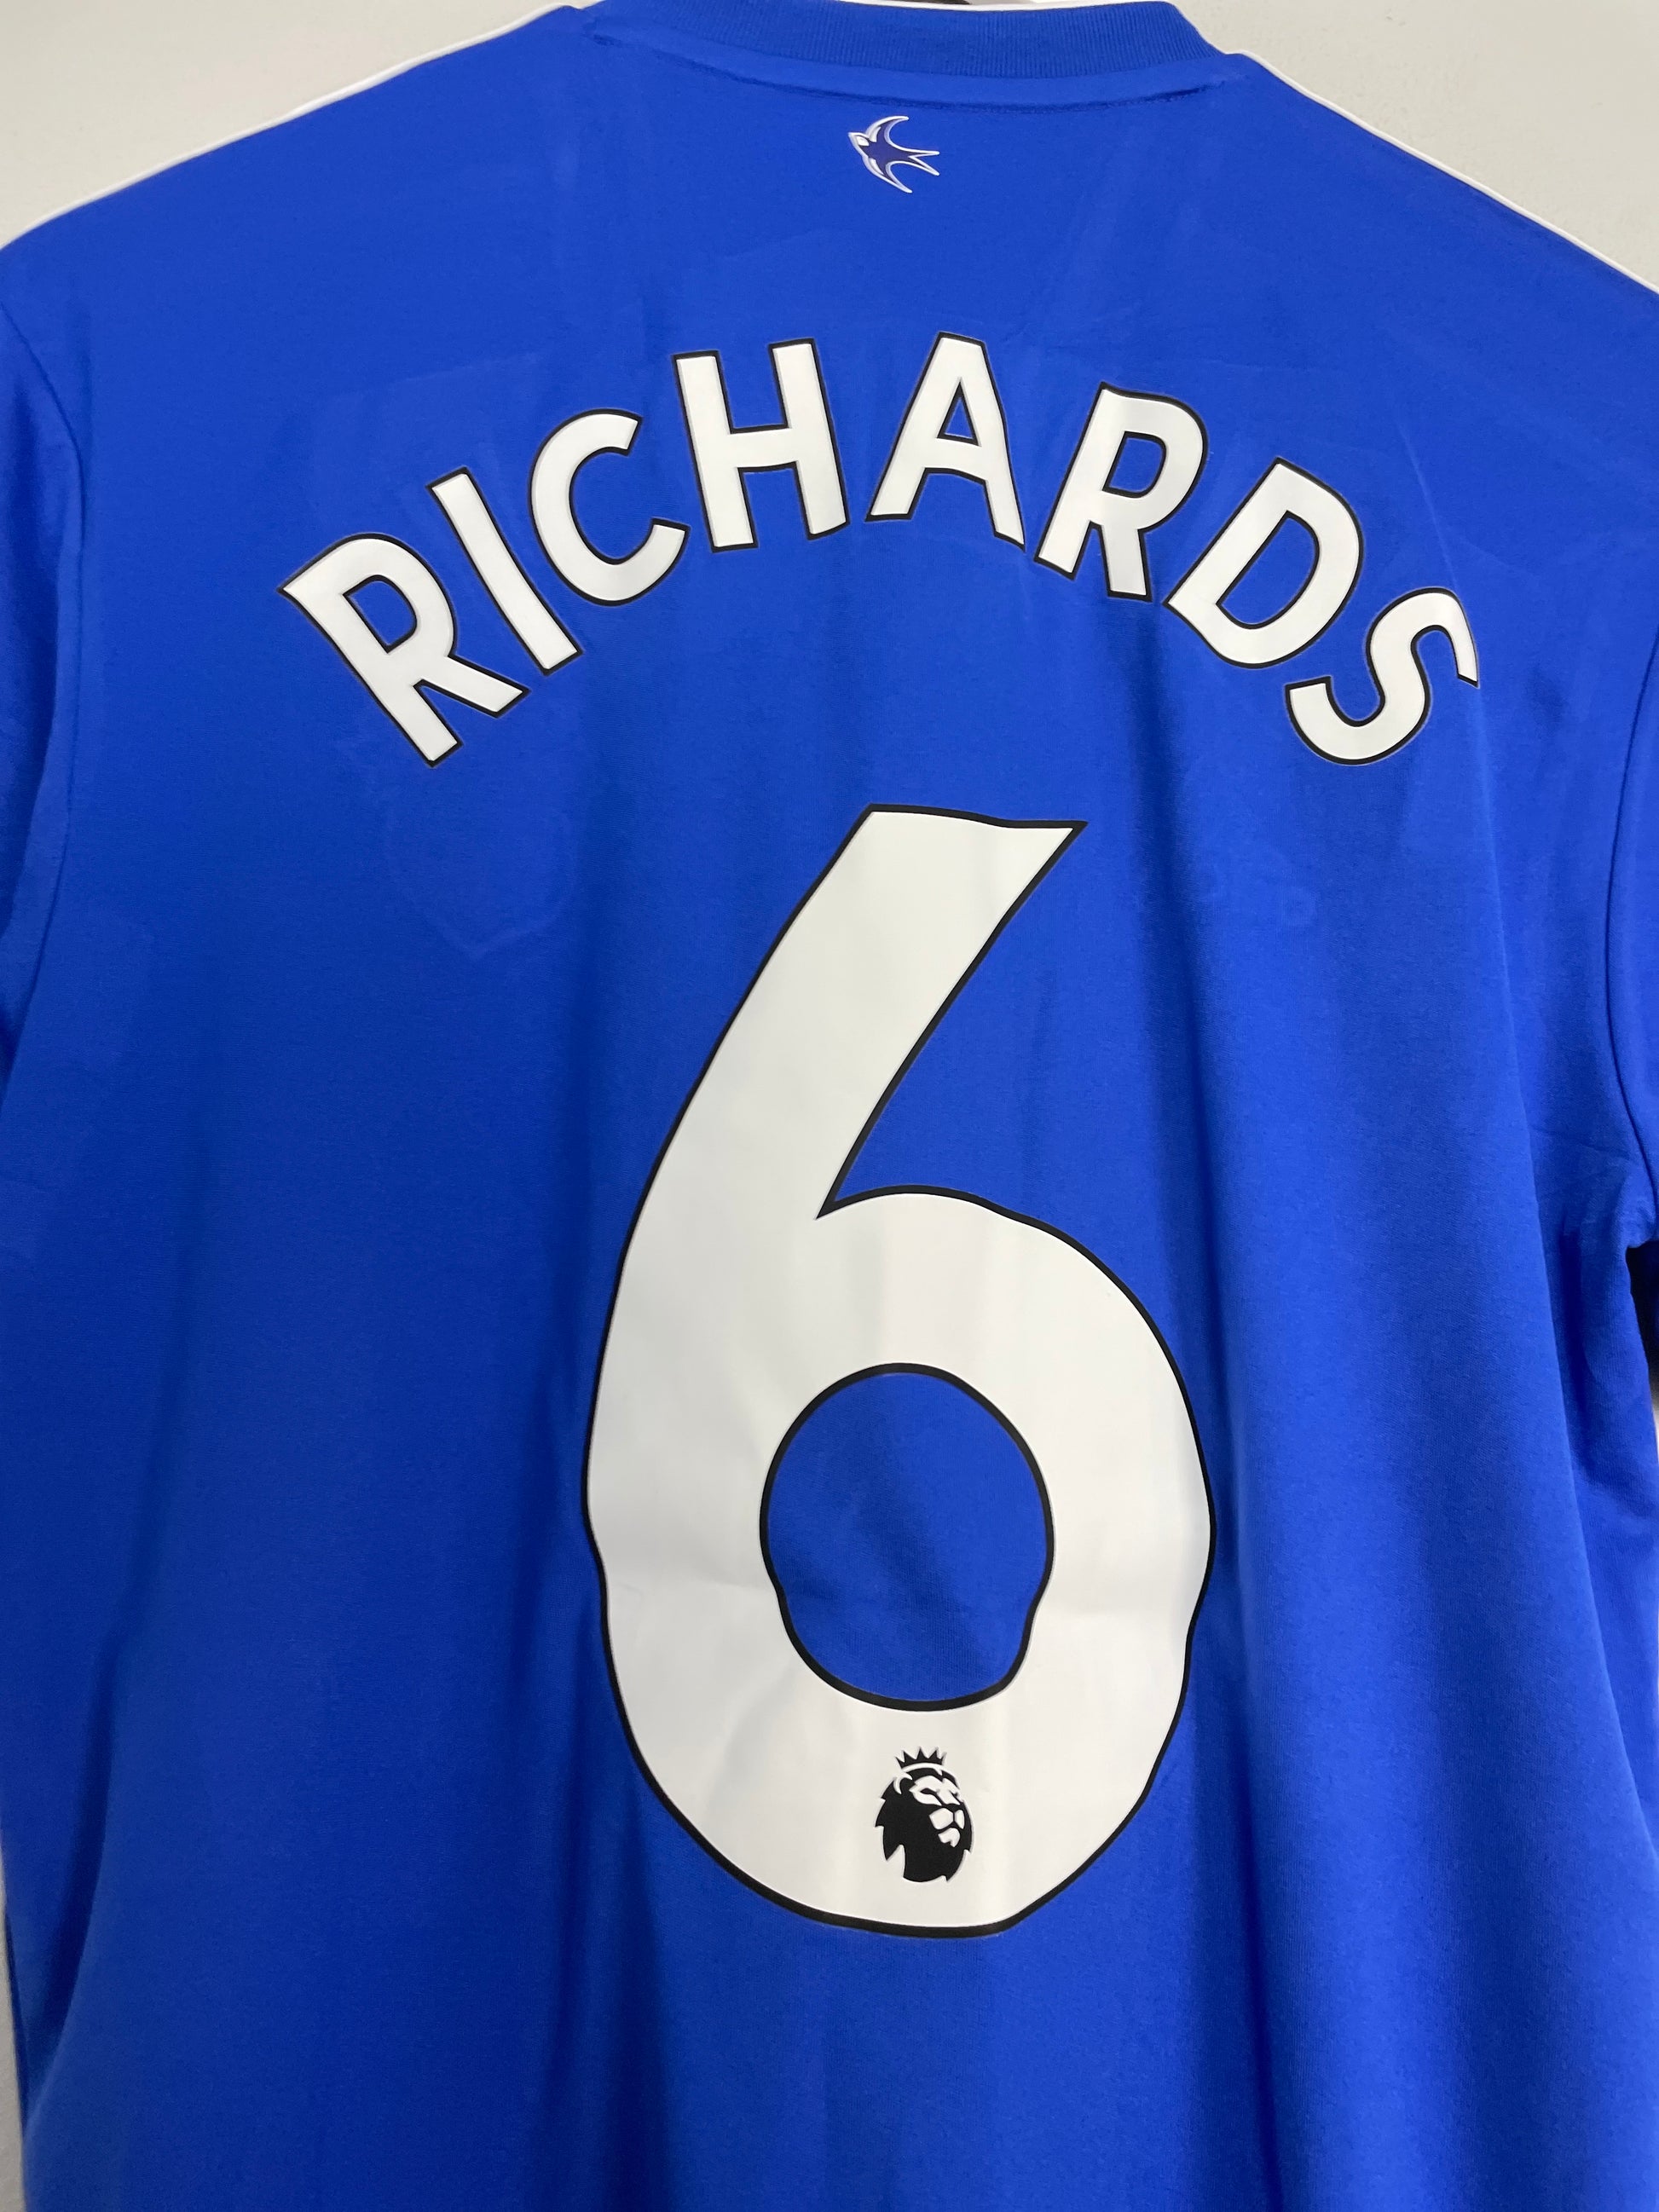 CULT KITS - 2018/19 CARDIFF RICHARDS #6 *MATCH ISSUE* HOME SHIRT